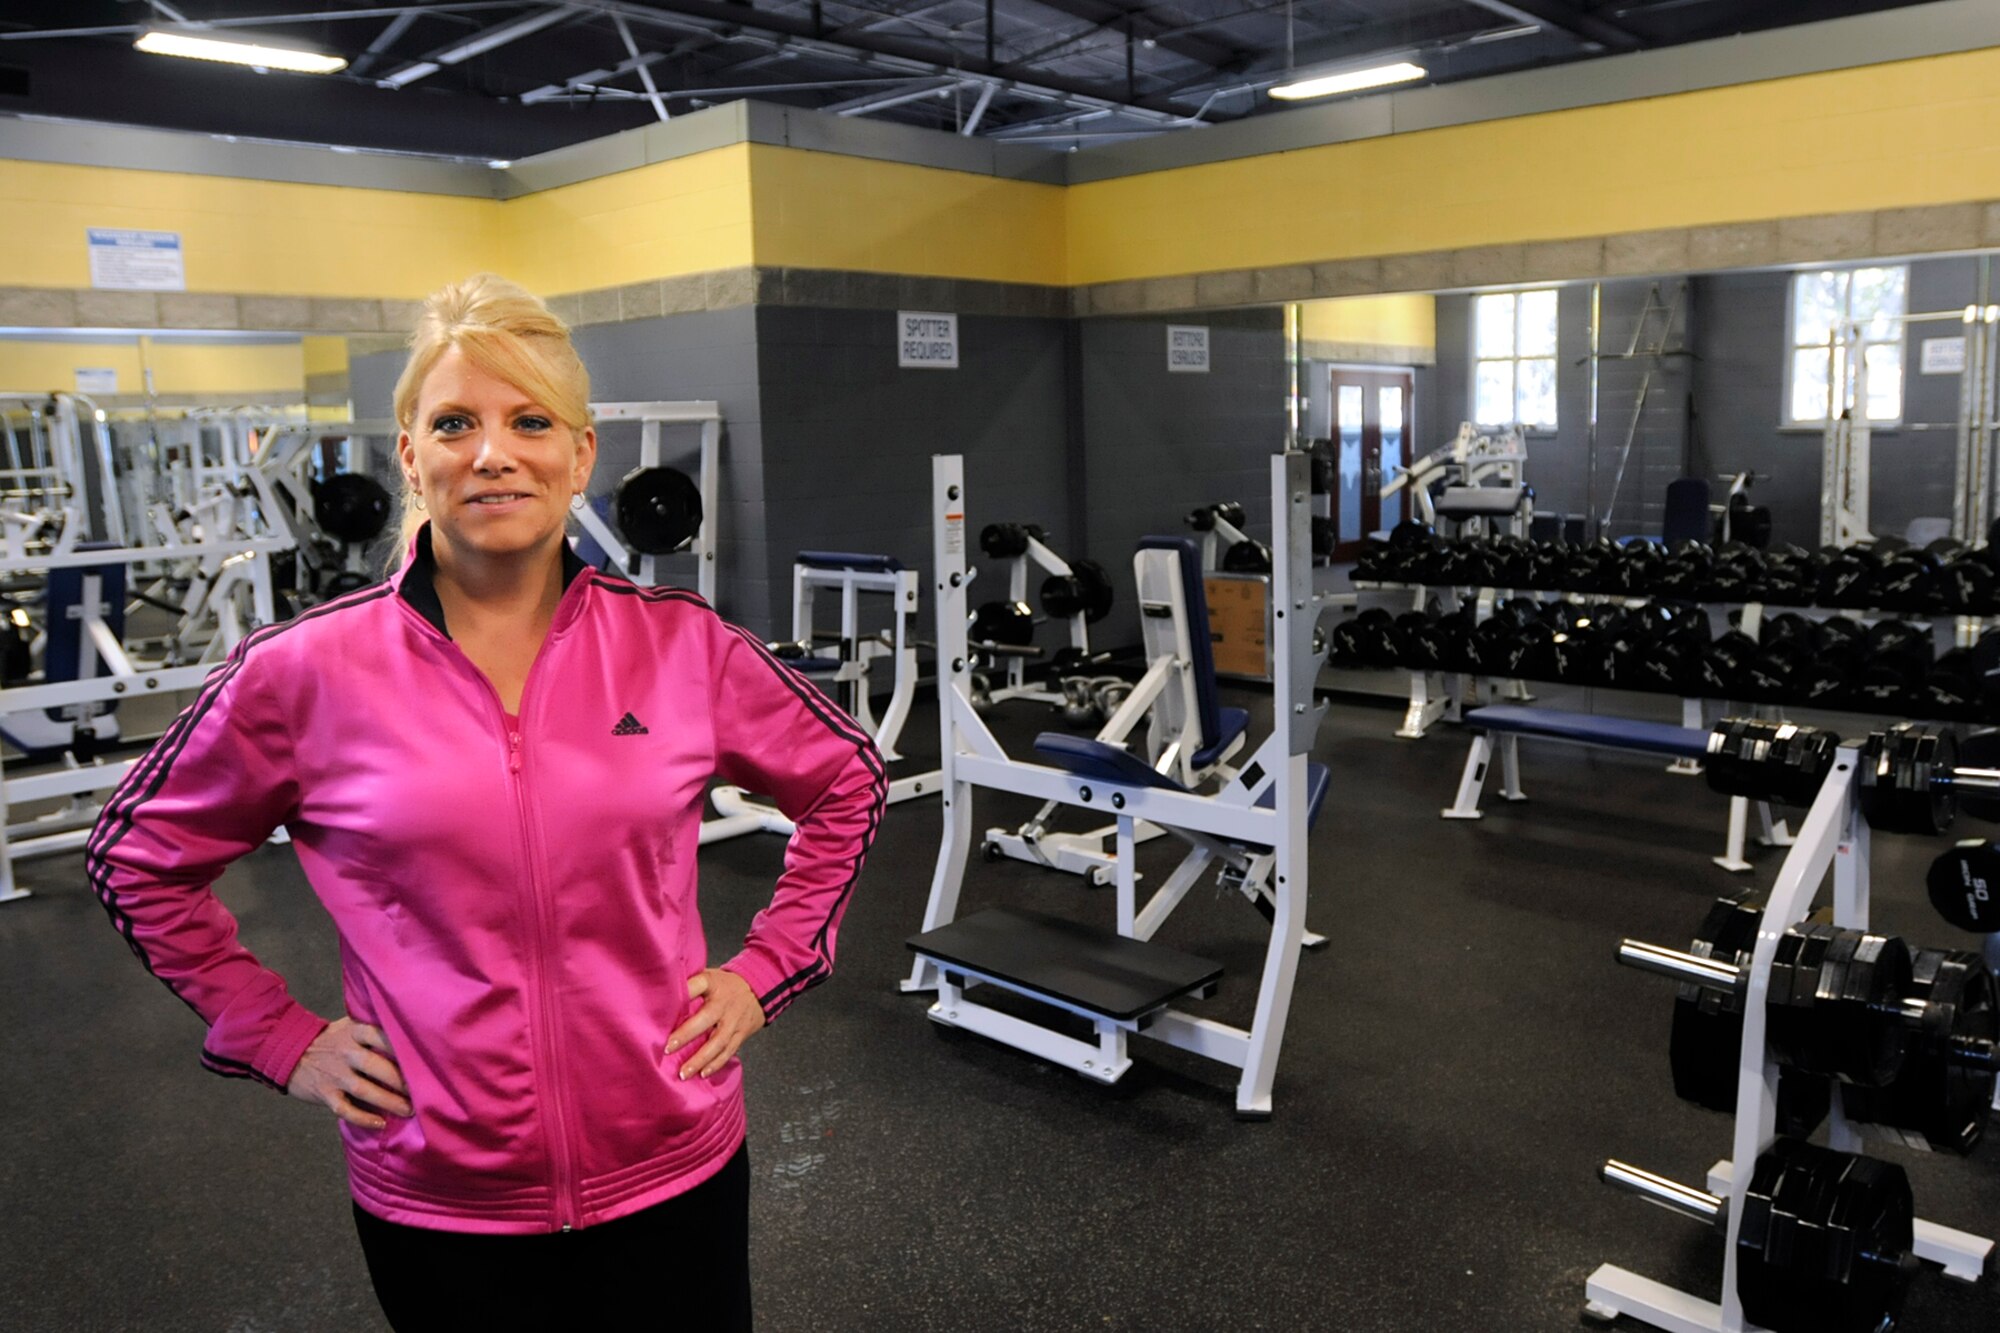 Michelle Walker, the Recreational Specialist at McEntire Joint National Guard Base, S.C., poses for her photo in the base gym on November 2, 2011.  Michelle was hired to work at the base gym to train, educate and encourage McEntire’s airmen to remain “fit to fight” and excel in the new Air Force fitness standards. 
(SCANG photo by TSgt Caycee Cook)